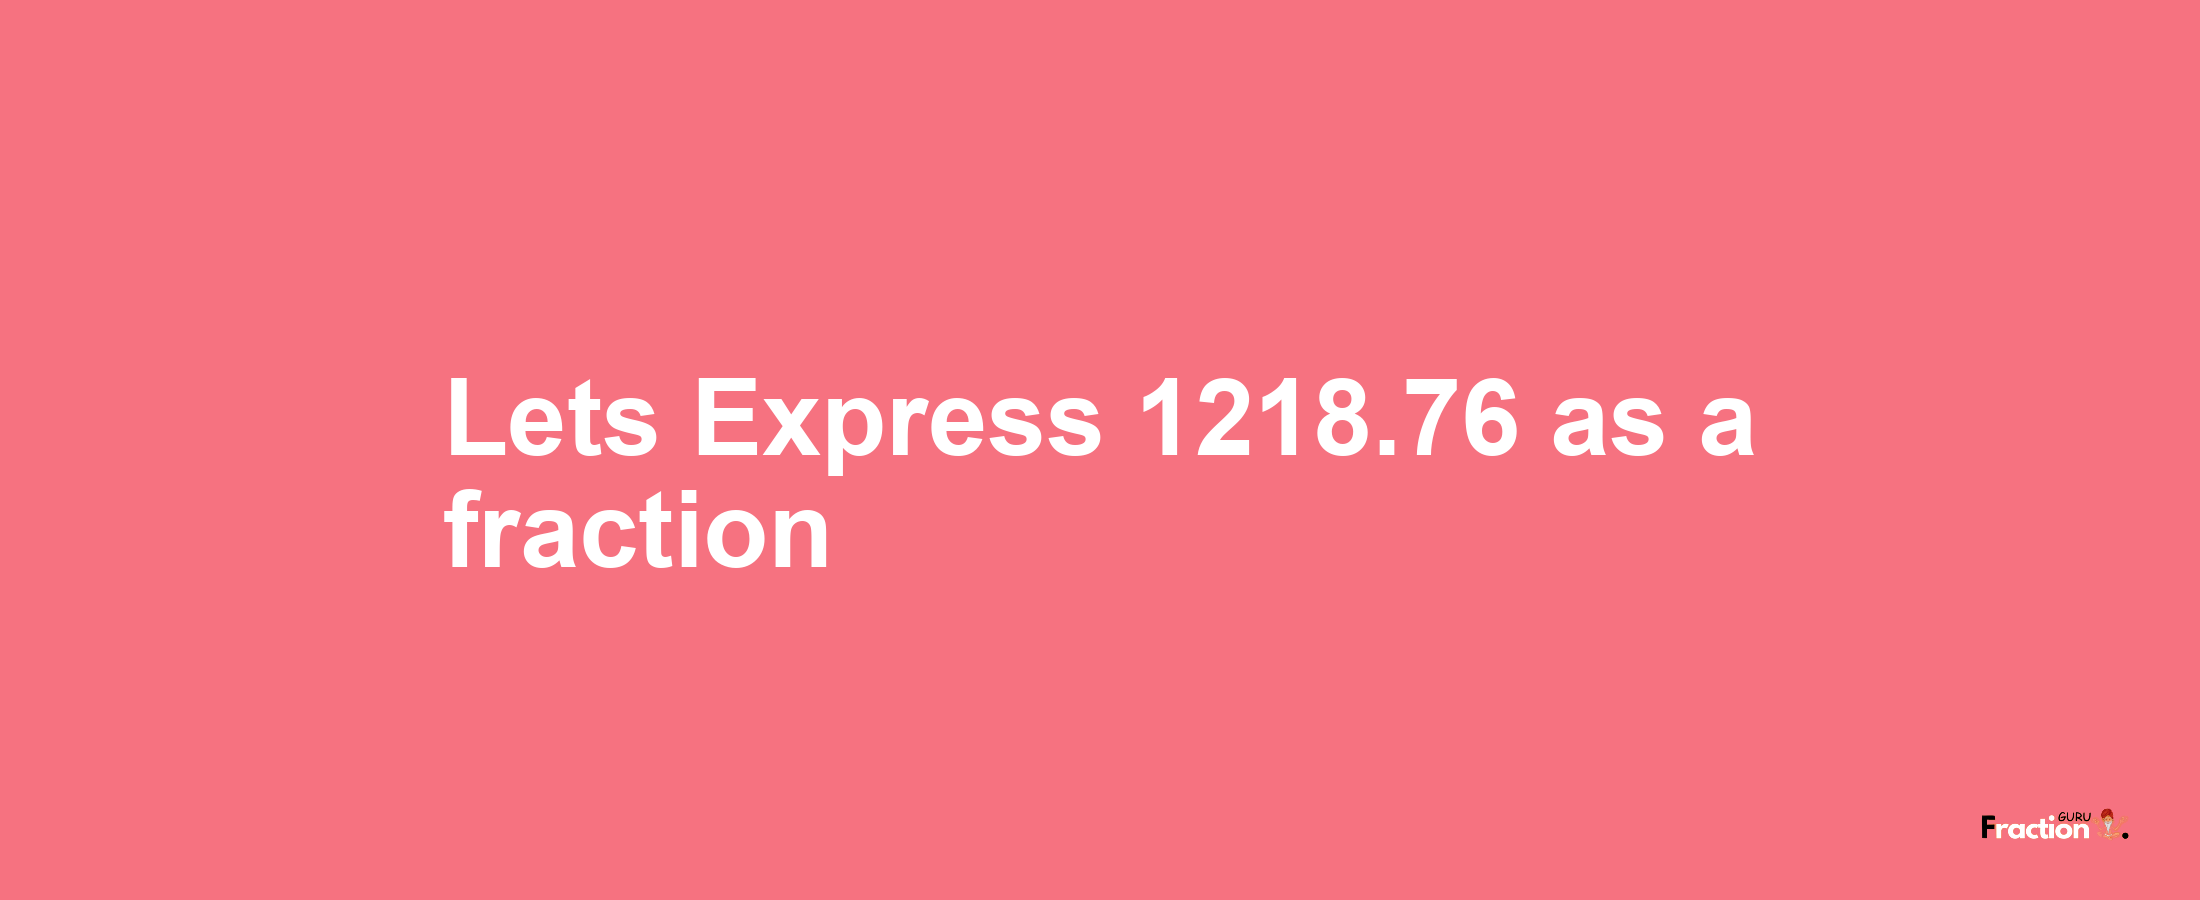 Lets Express 1218.76 as afraction